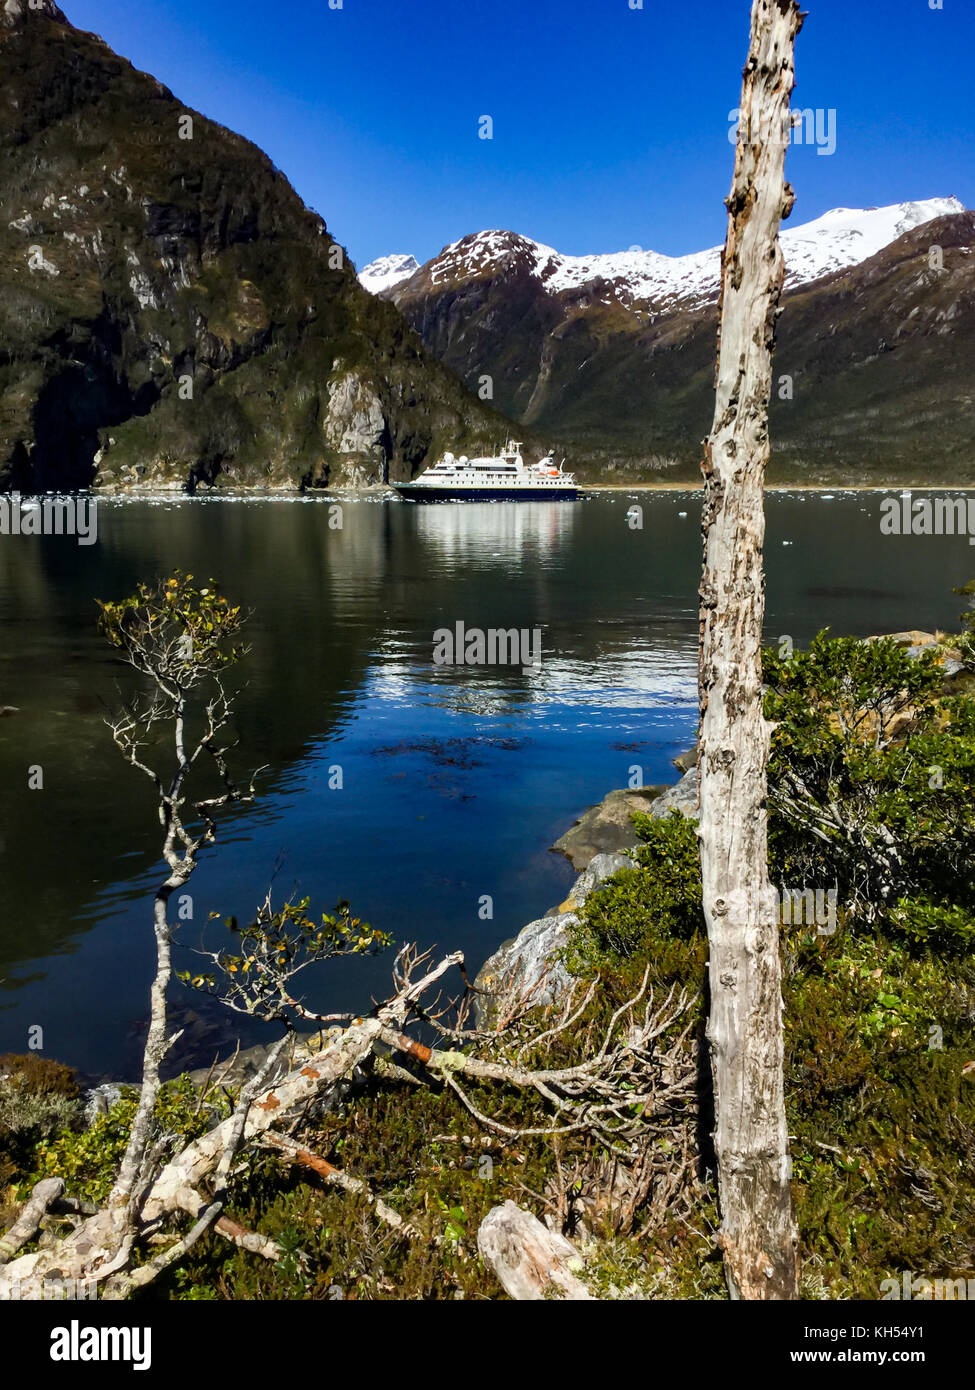 The National Geographic Orion expedition ship near Garibaldi Glacier in the fjords of Chile Stock Photo